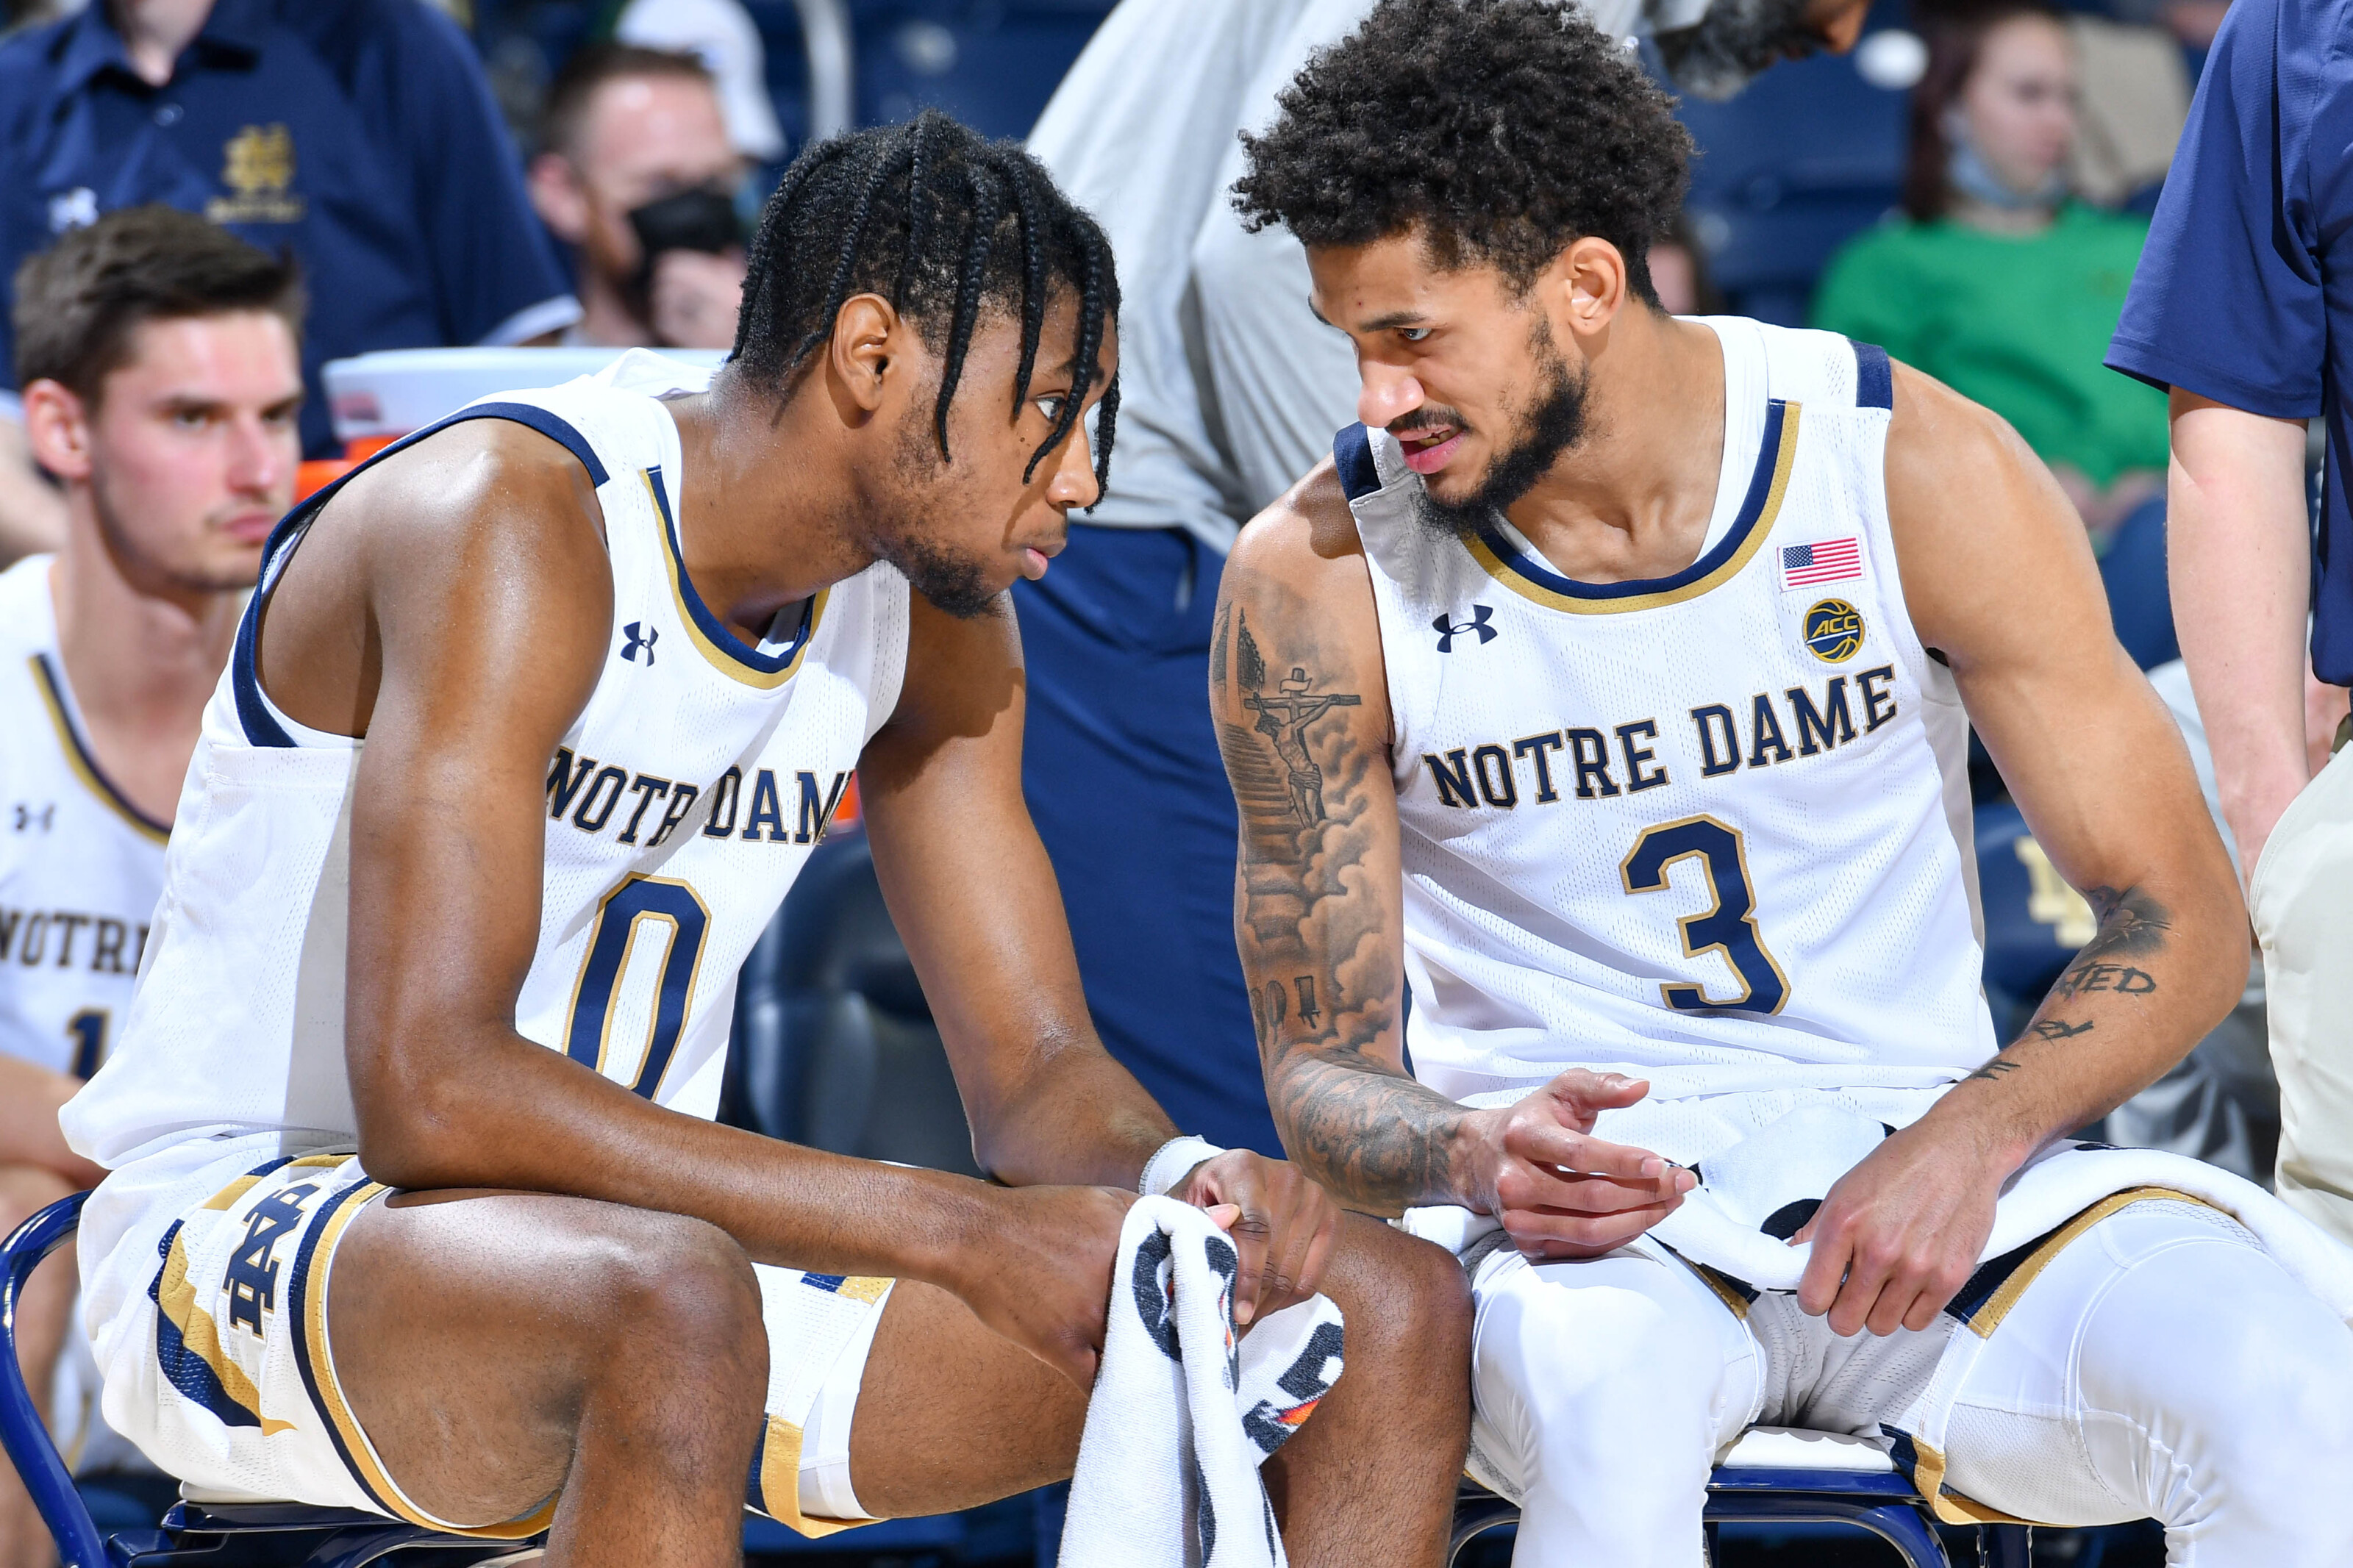 Notre Dame basketball Game Today Notre Dame vs UNC Line, Predictions, Odds, TV Channel and Live Stream for Basketball Game January 5